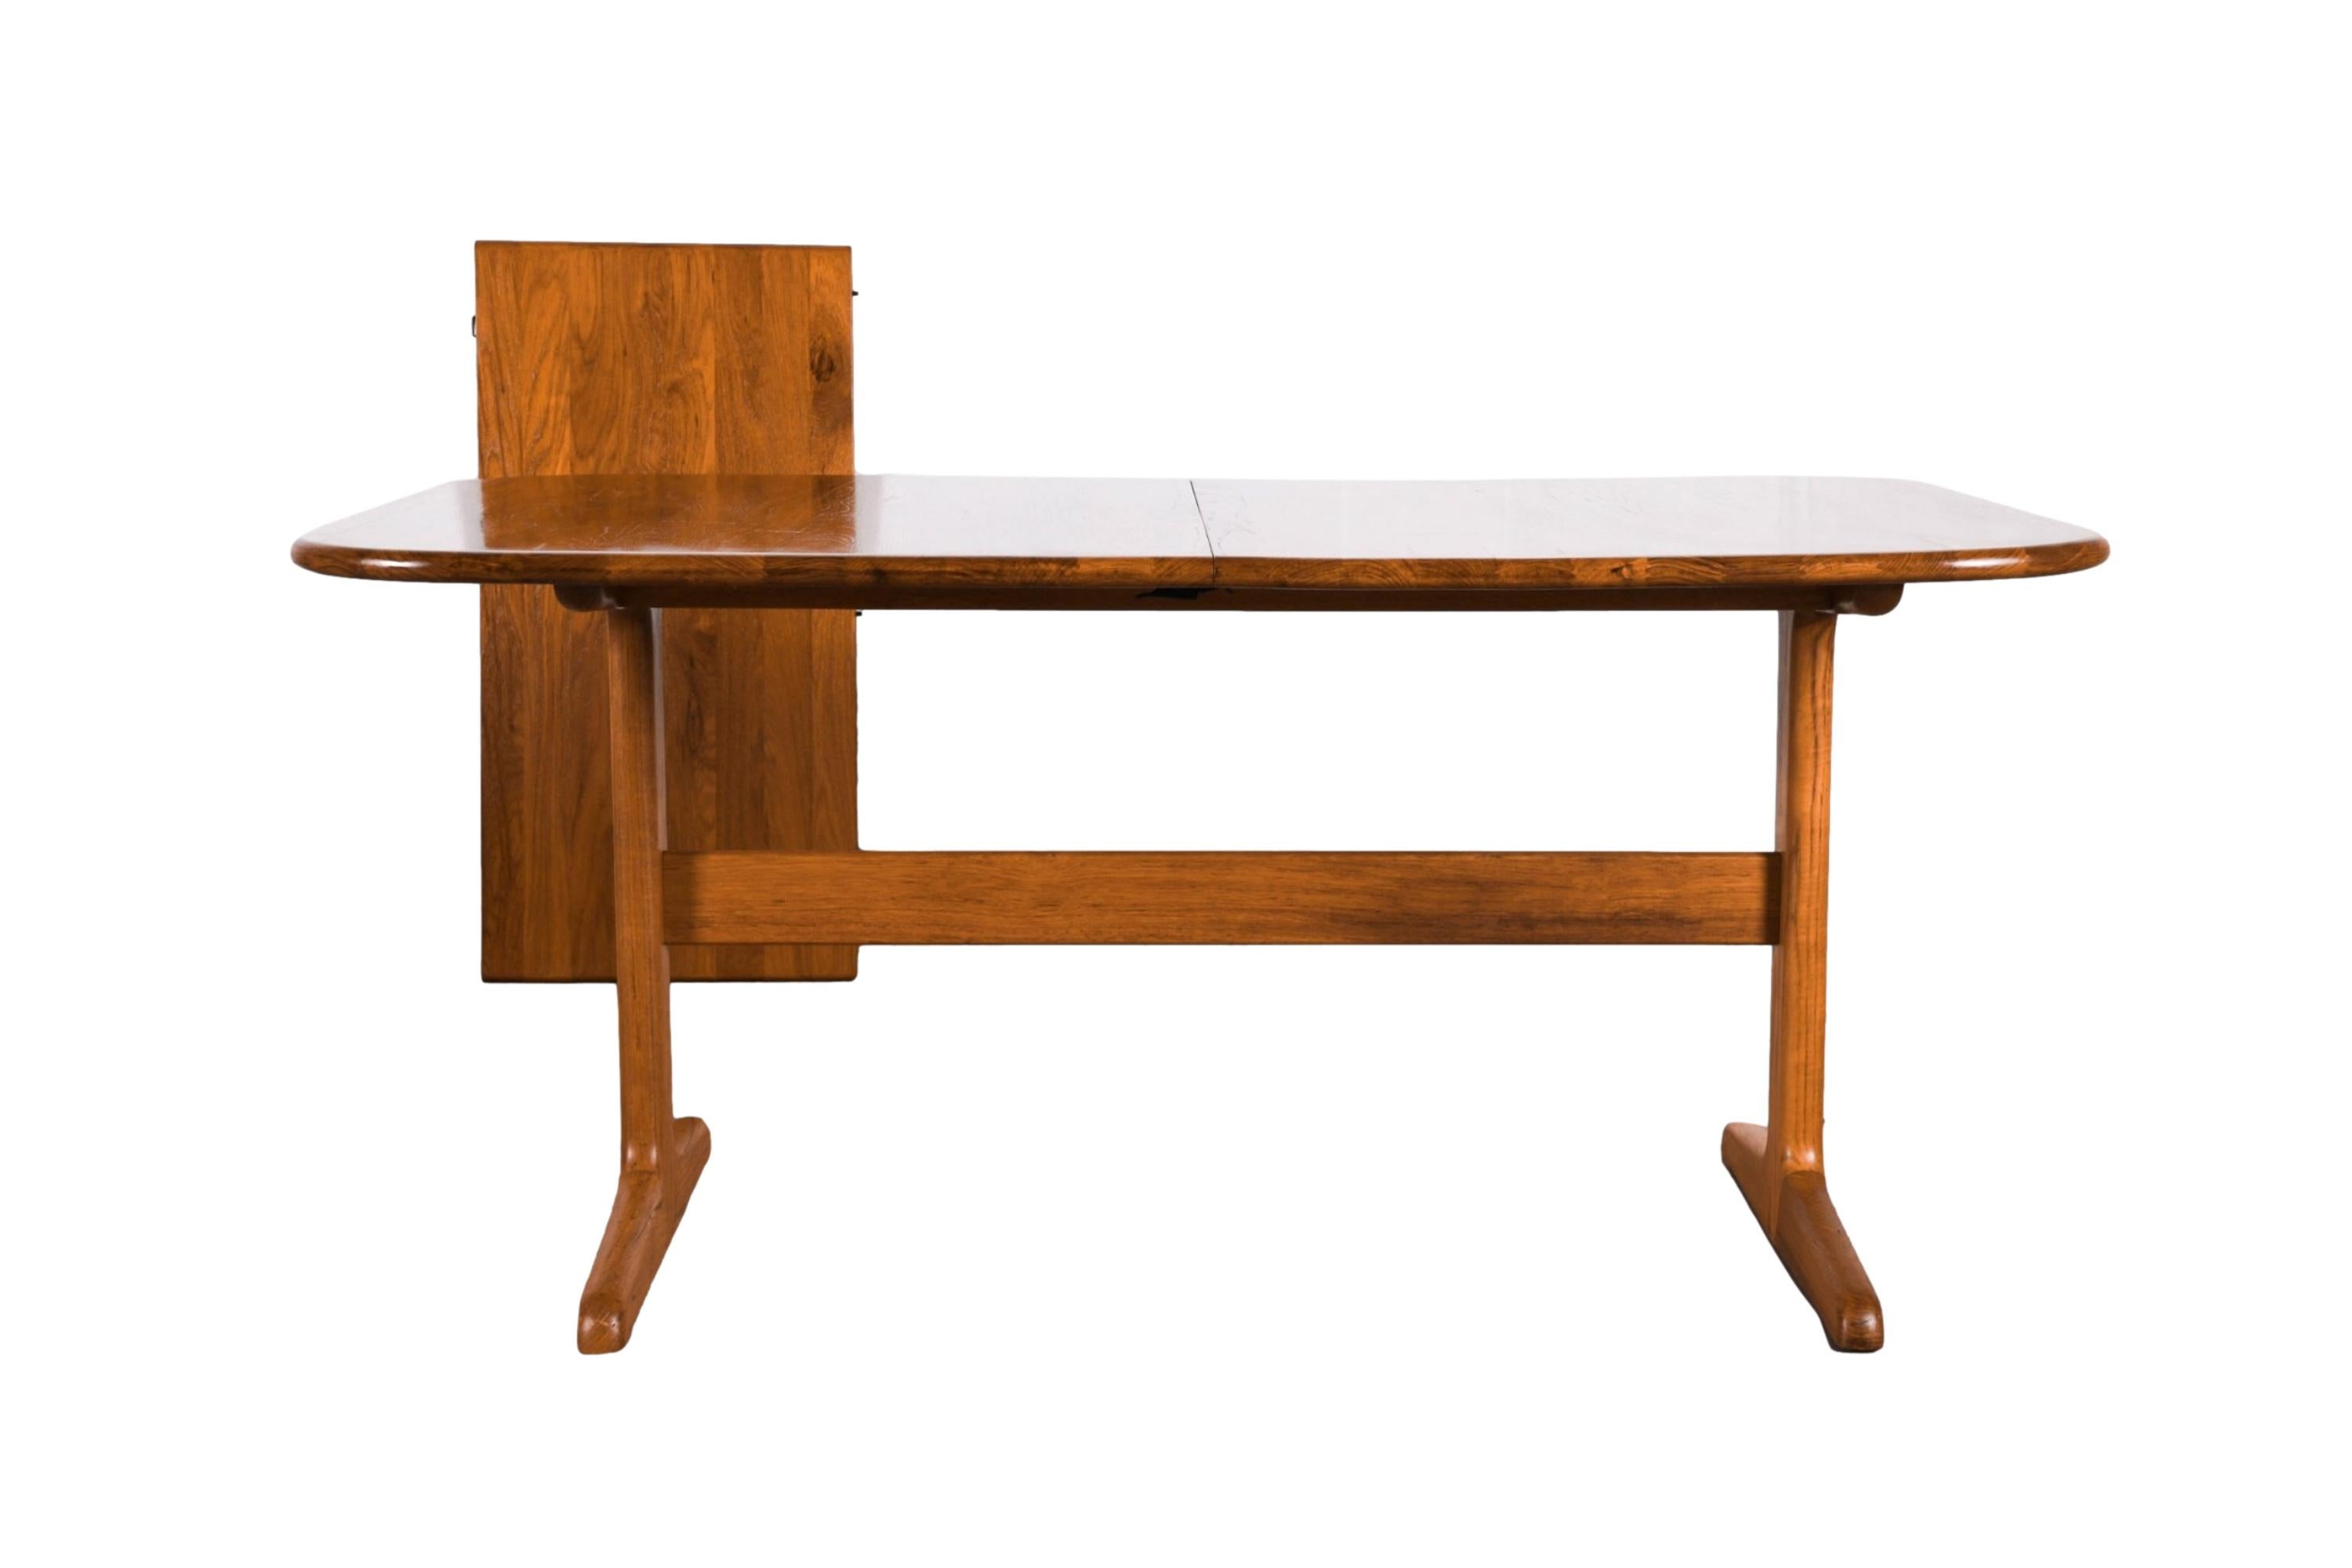 Beautiful Mid-Century Modern expandable dining table, circa 1970’s. Featuring richly grained, gleaming teak and smooth, clean lines characteristic of classic Danish design. This remarkable dining table comes with one extension leaf to accommodate